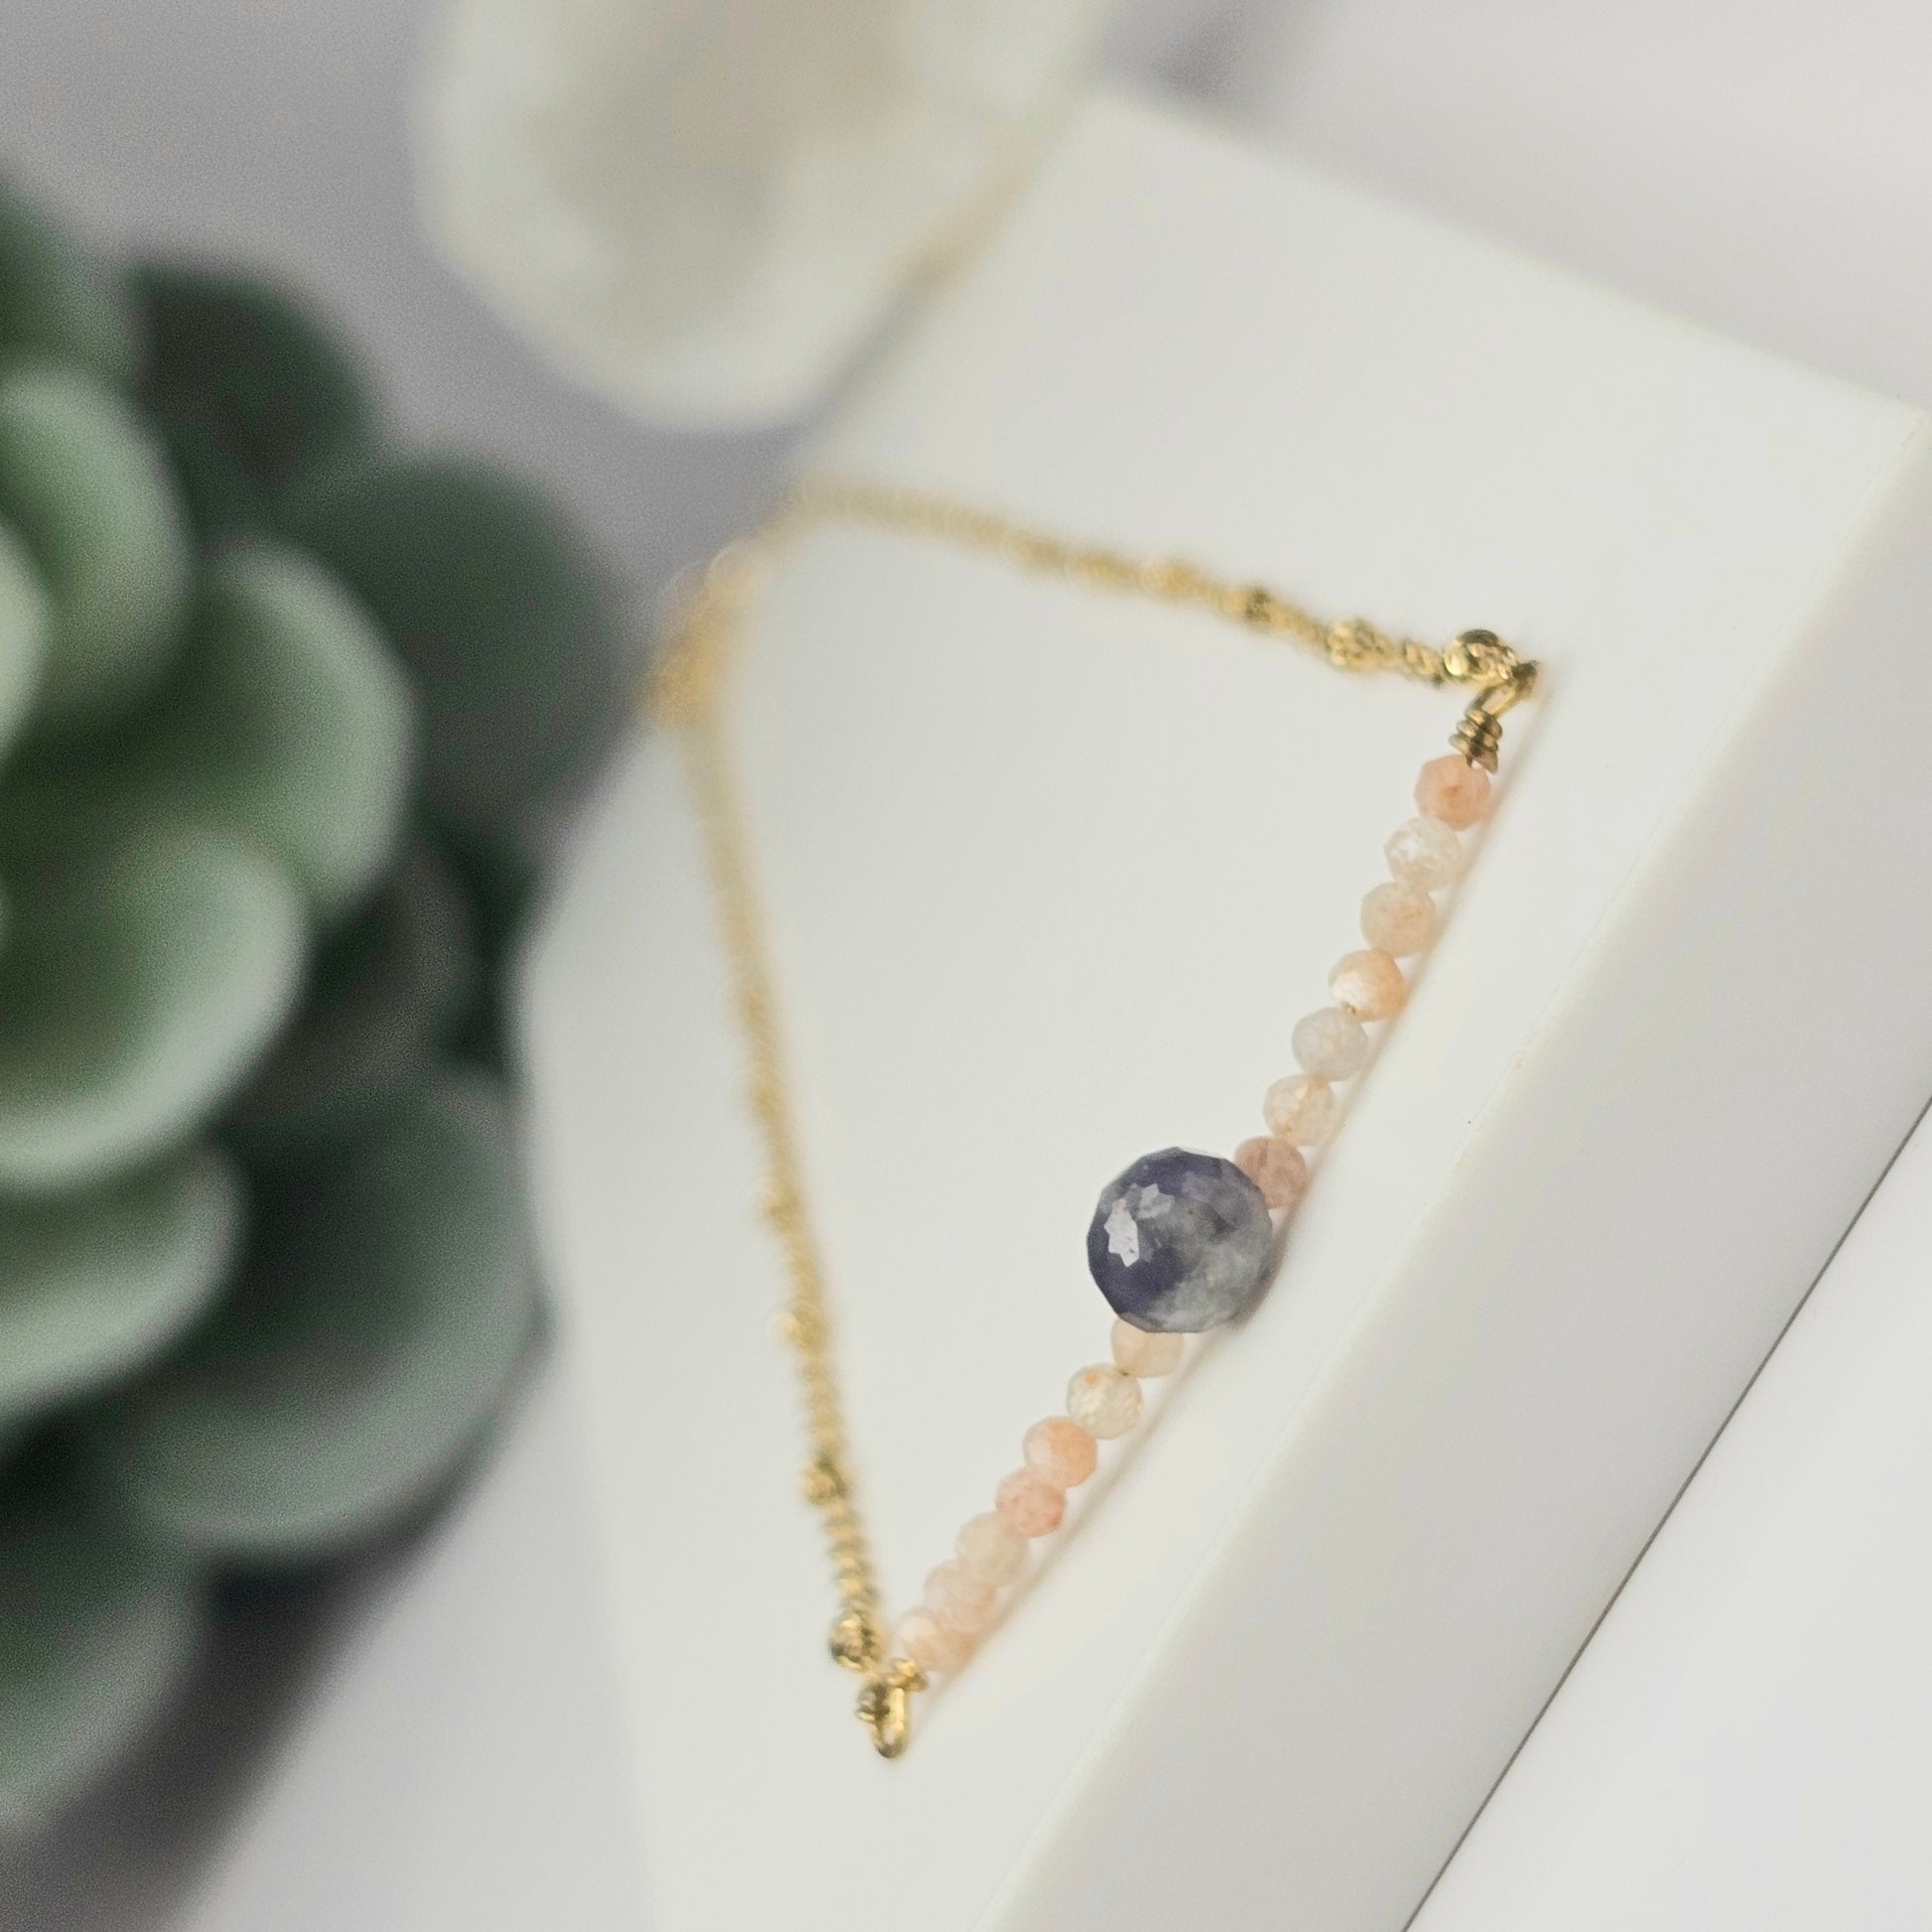 Gold toned stainless steel chain adorned with dainty Lapis Lazuli and Sunstone beads.